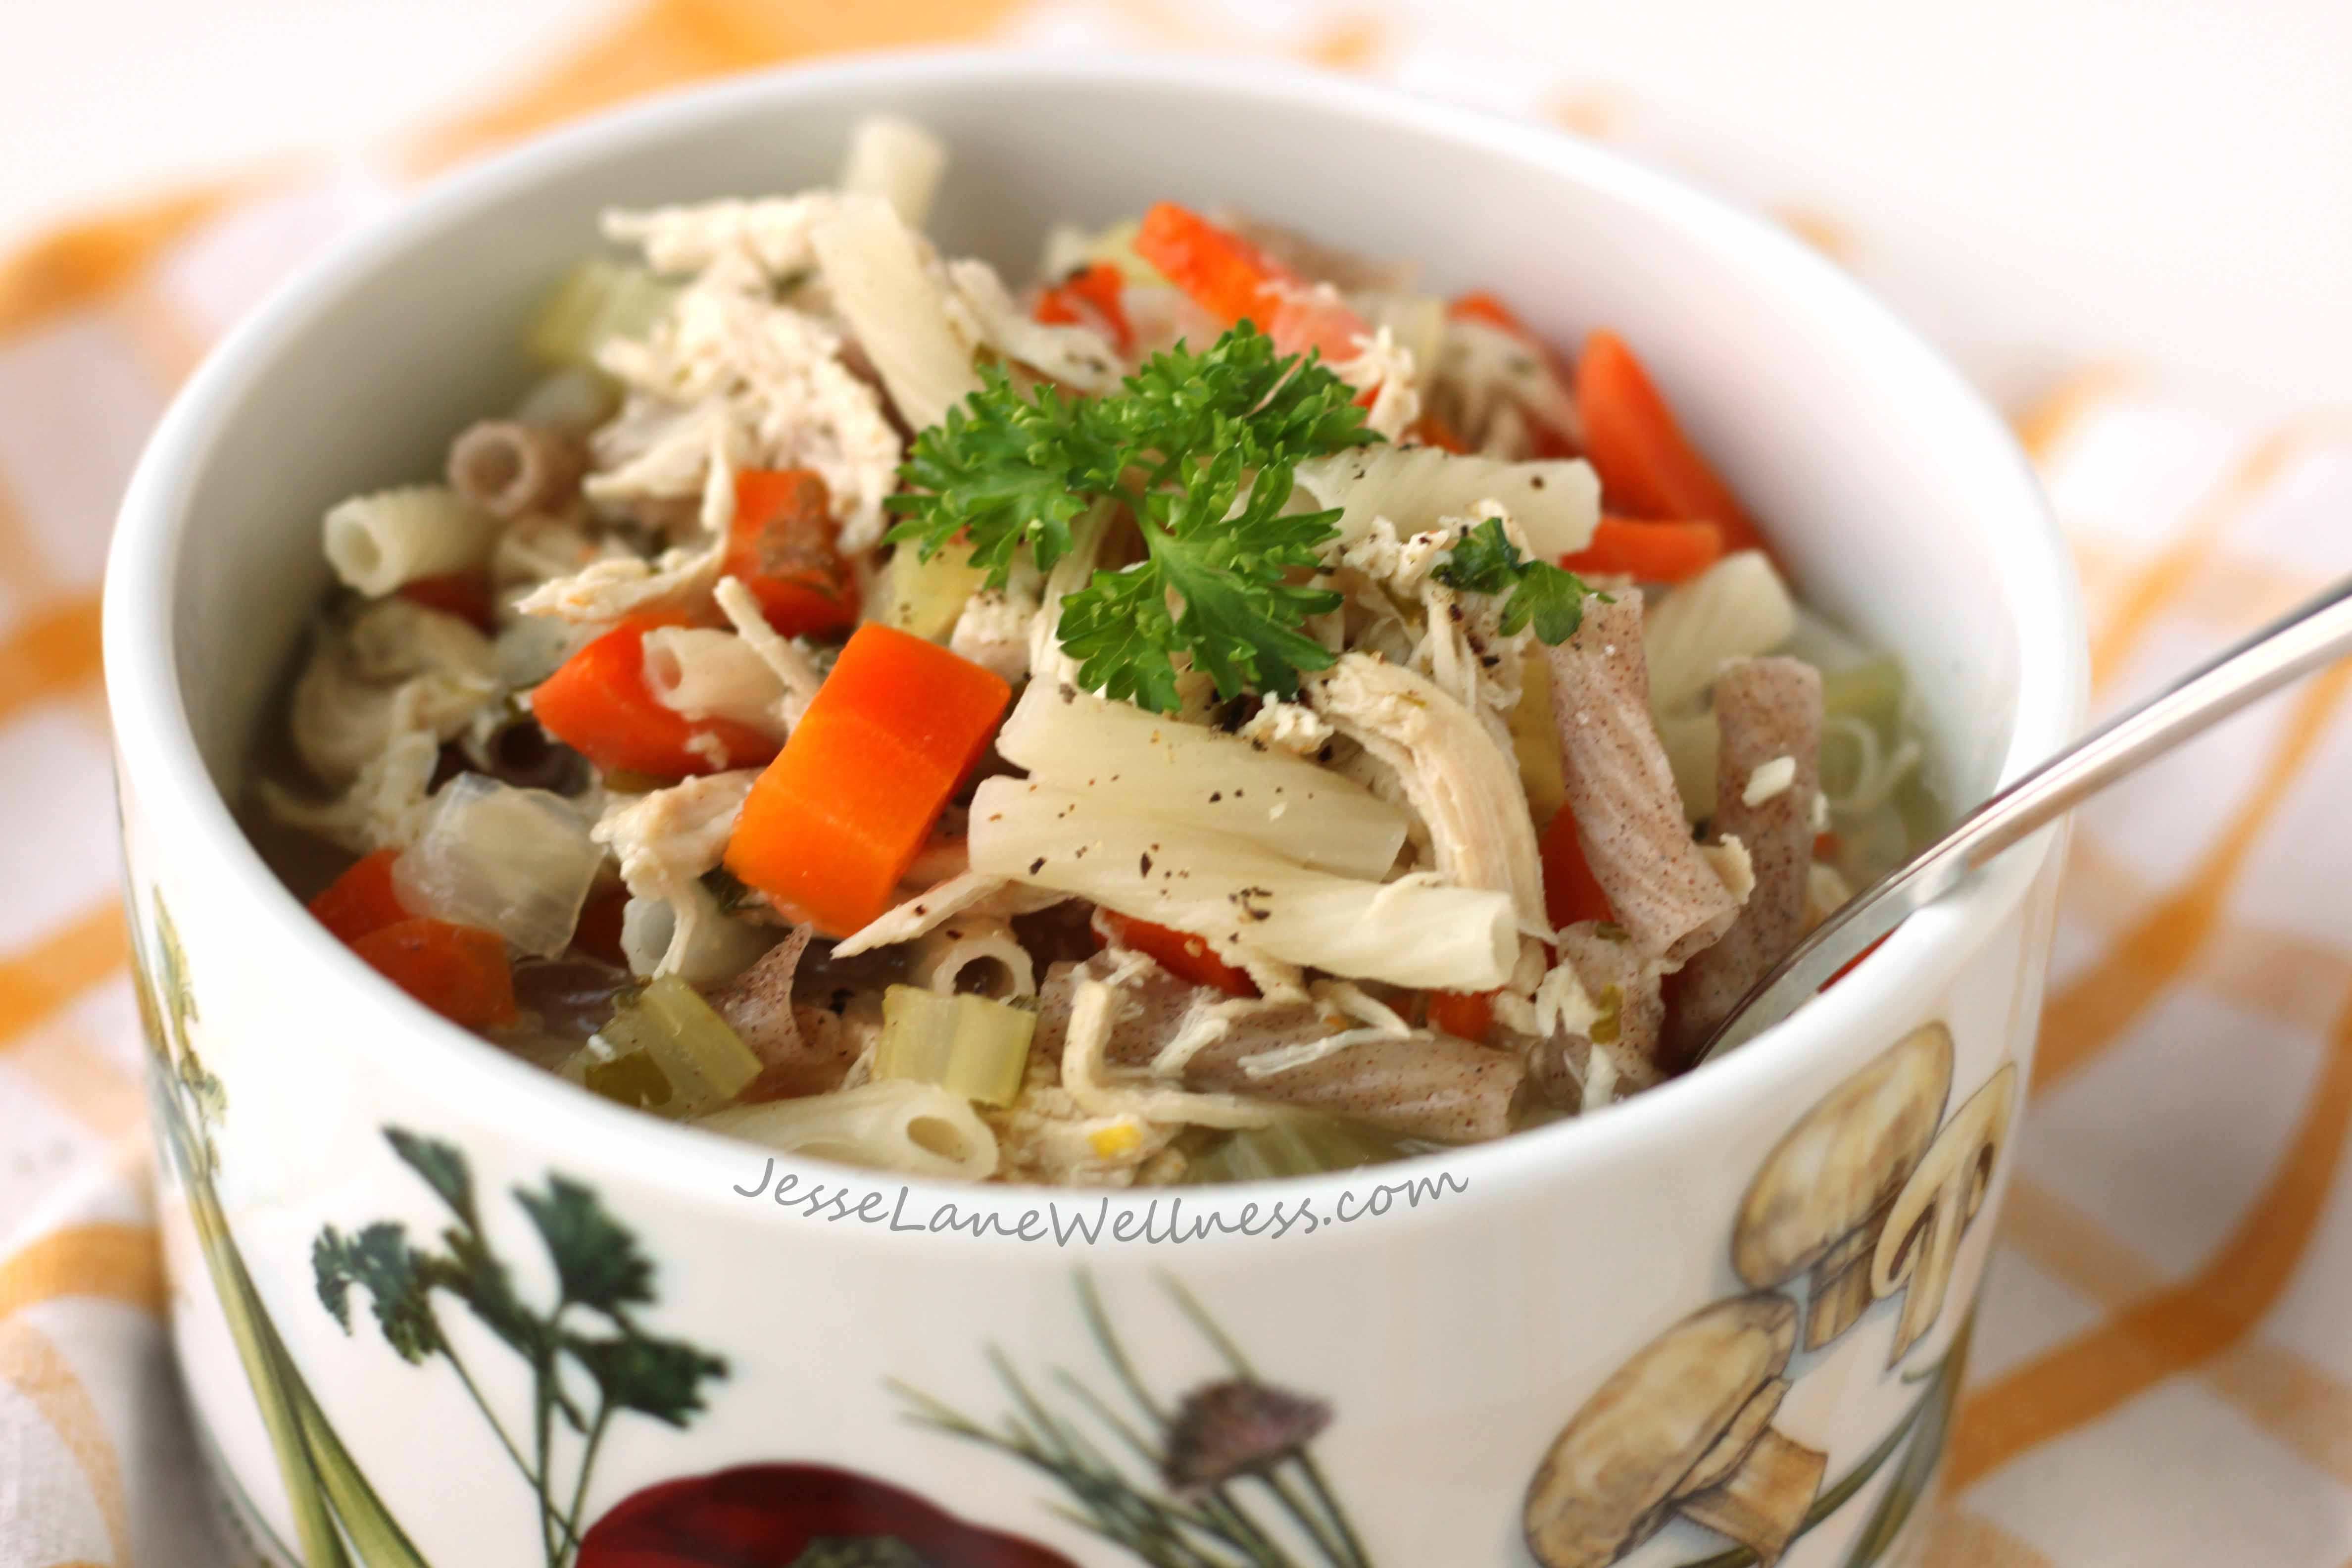 Healthy Chicken Soup Recipes
 Healthy Chicken Noodle Soup Recipe by Jesse Lane Wellness